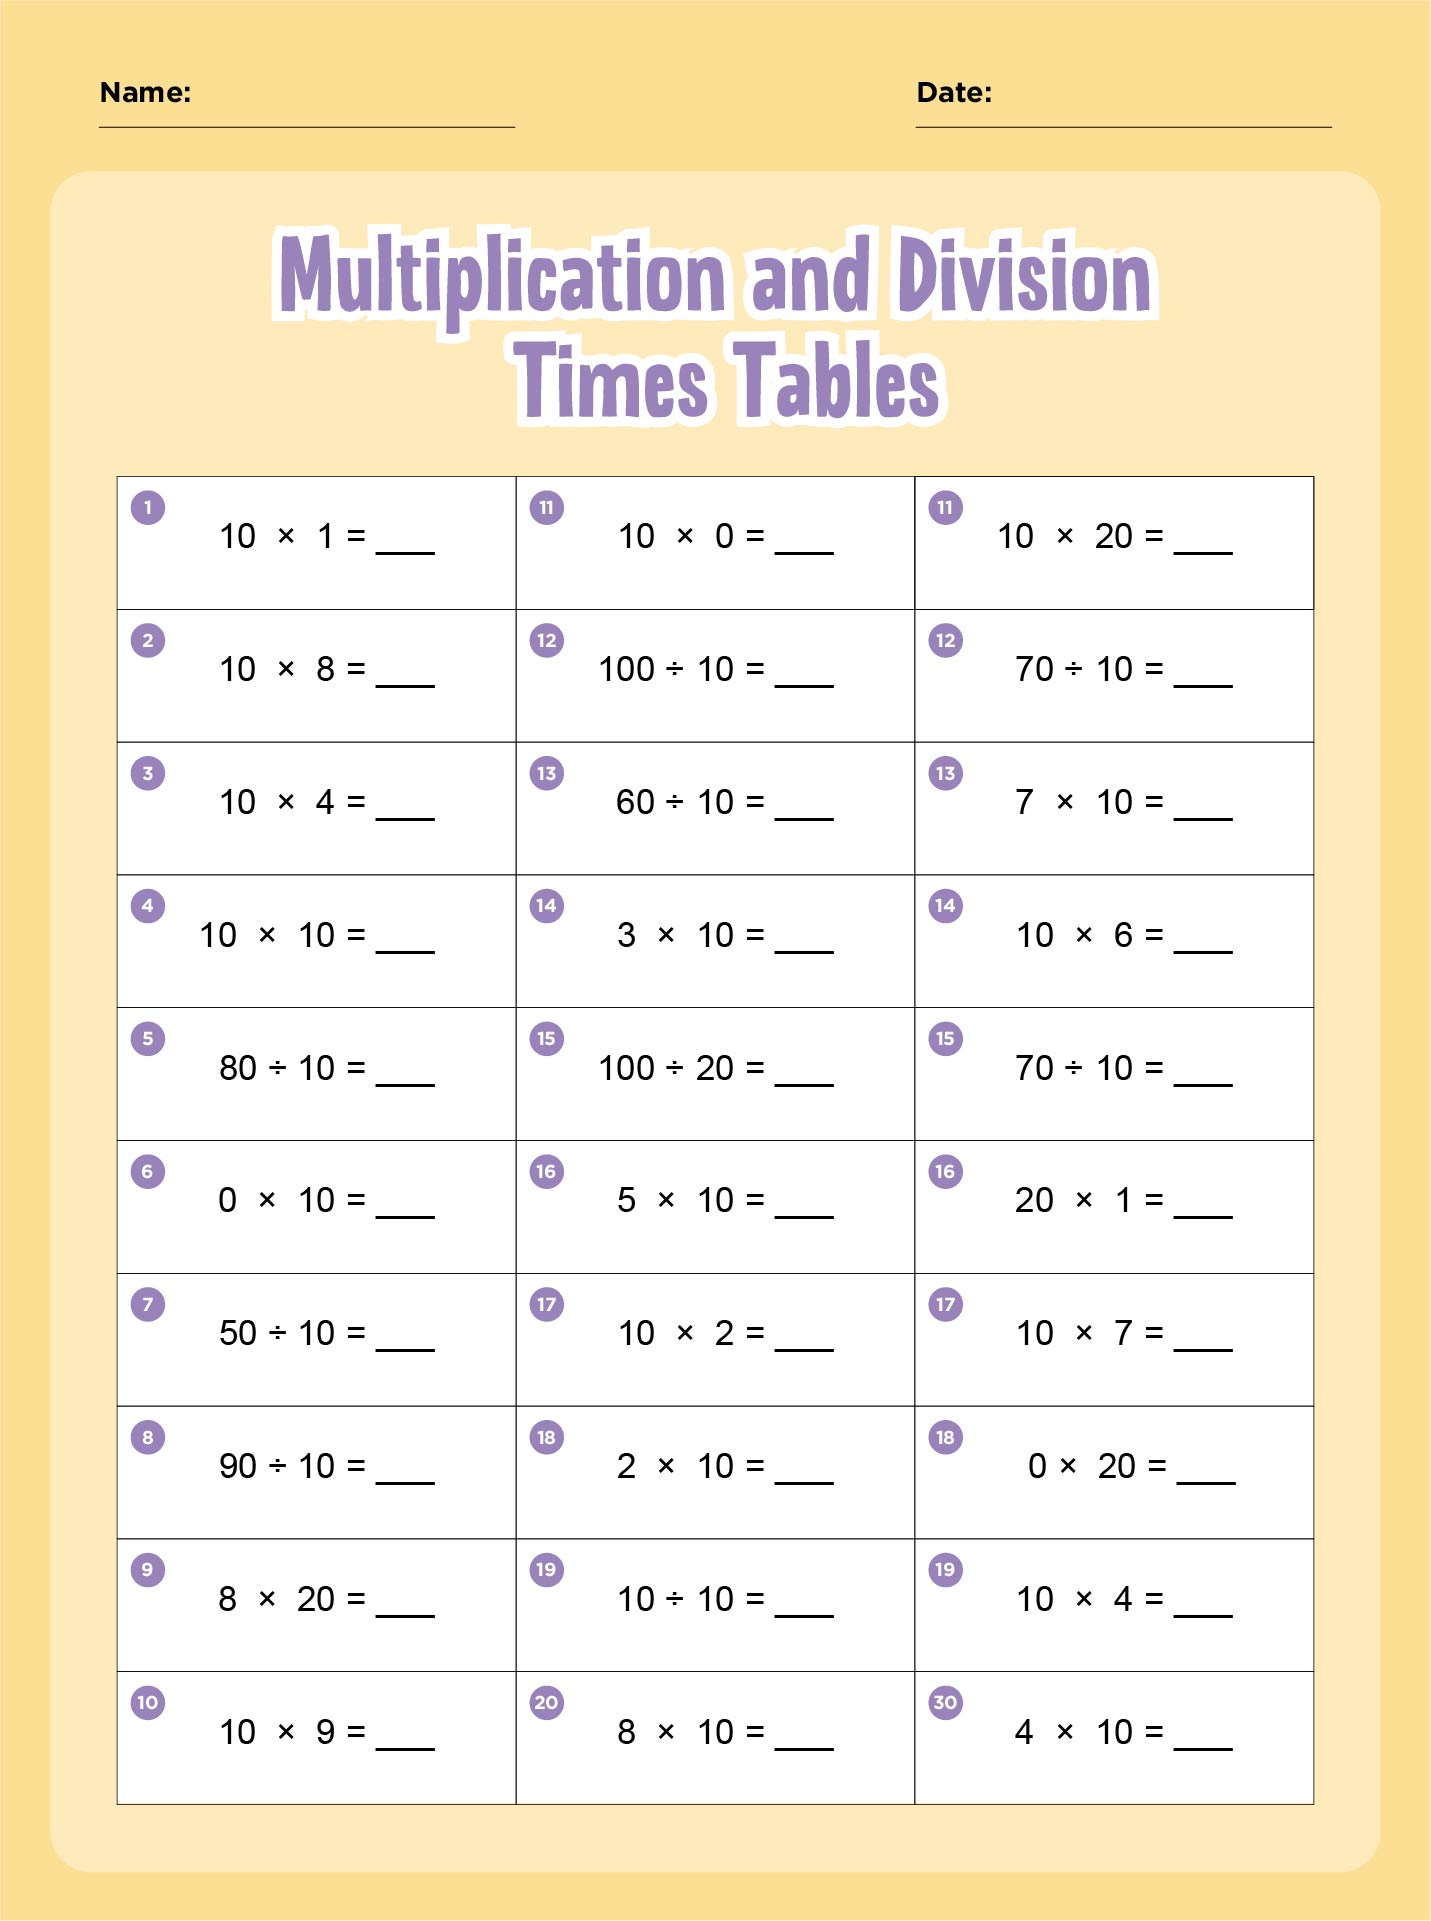 Division Times Tables Worksheets